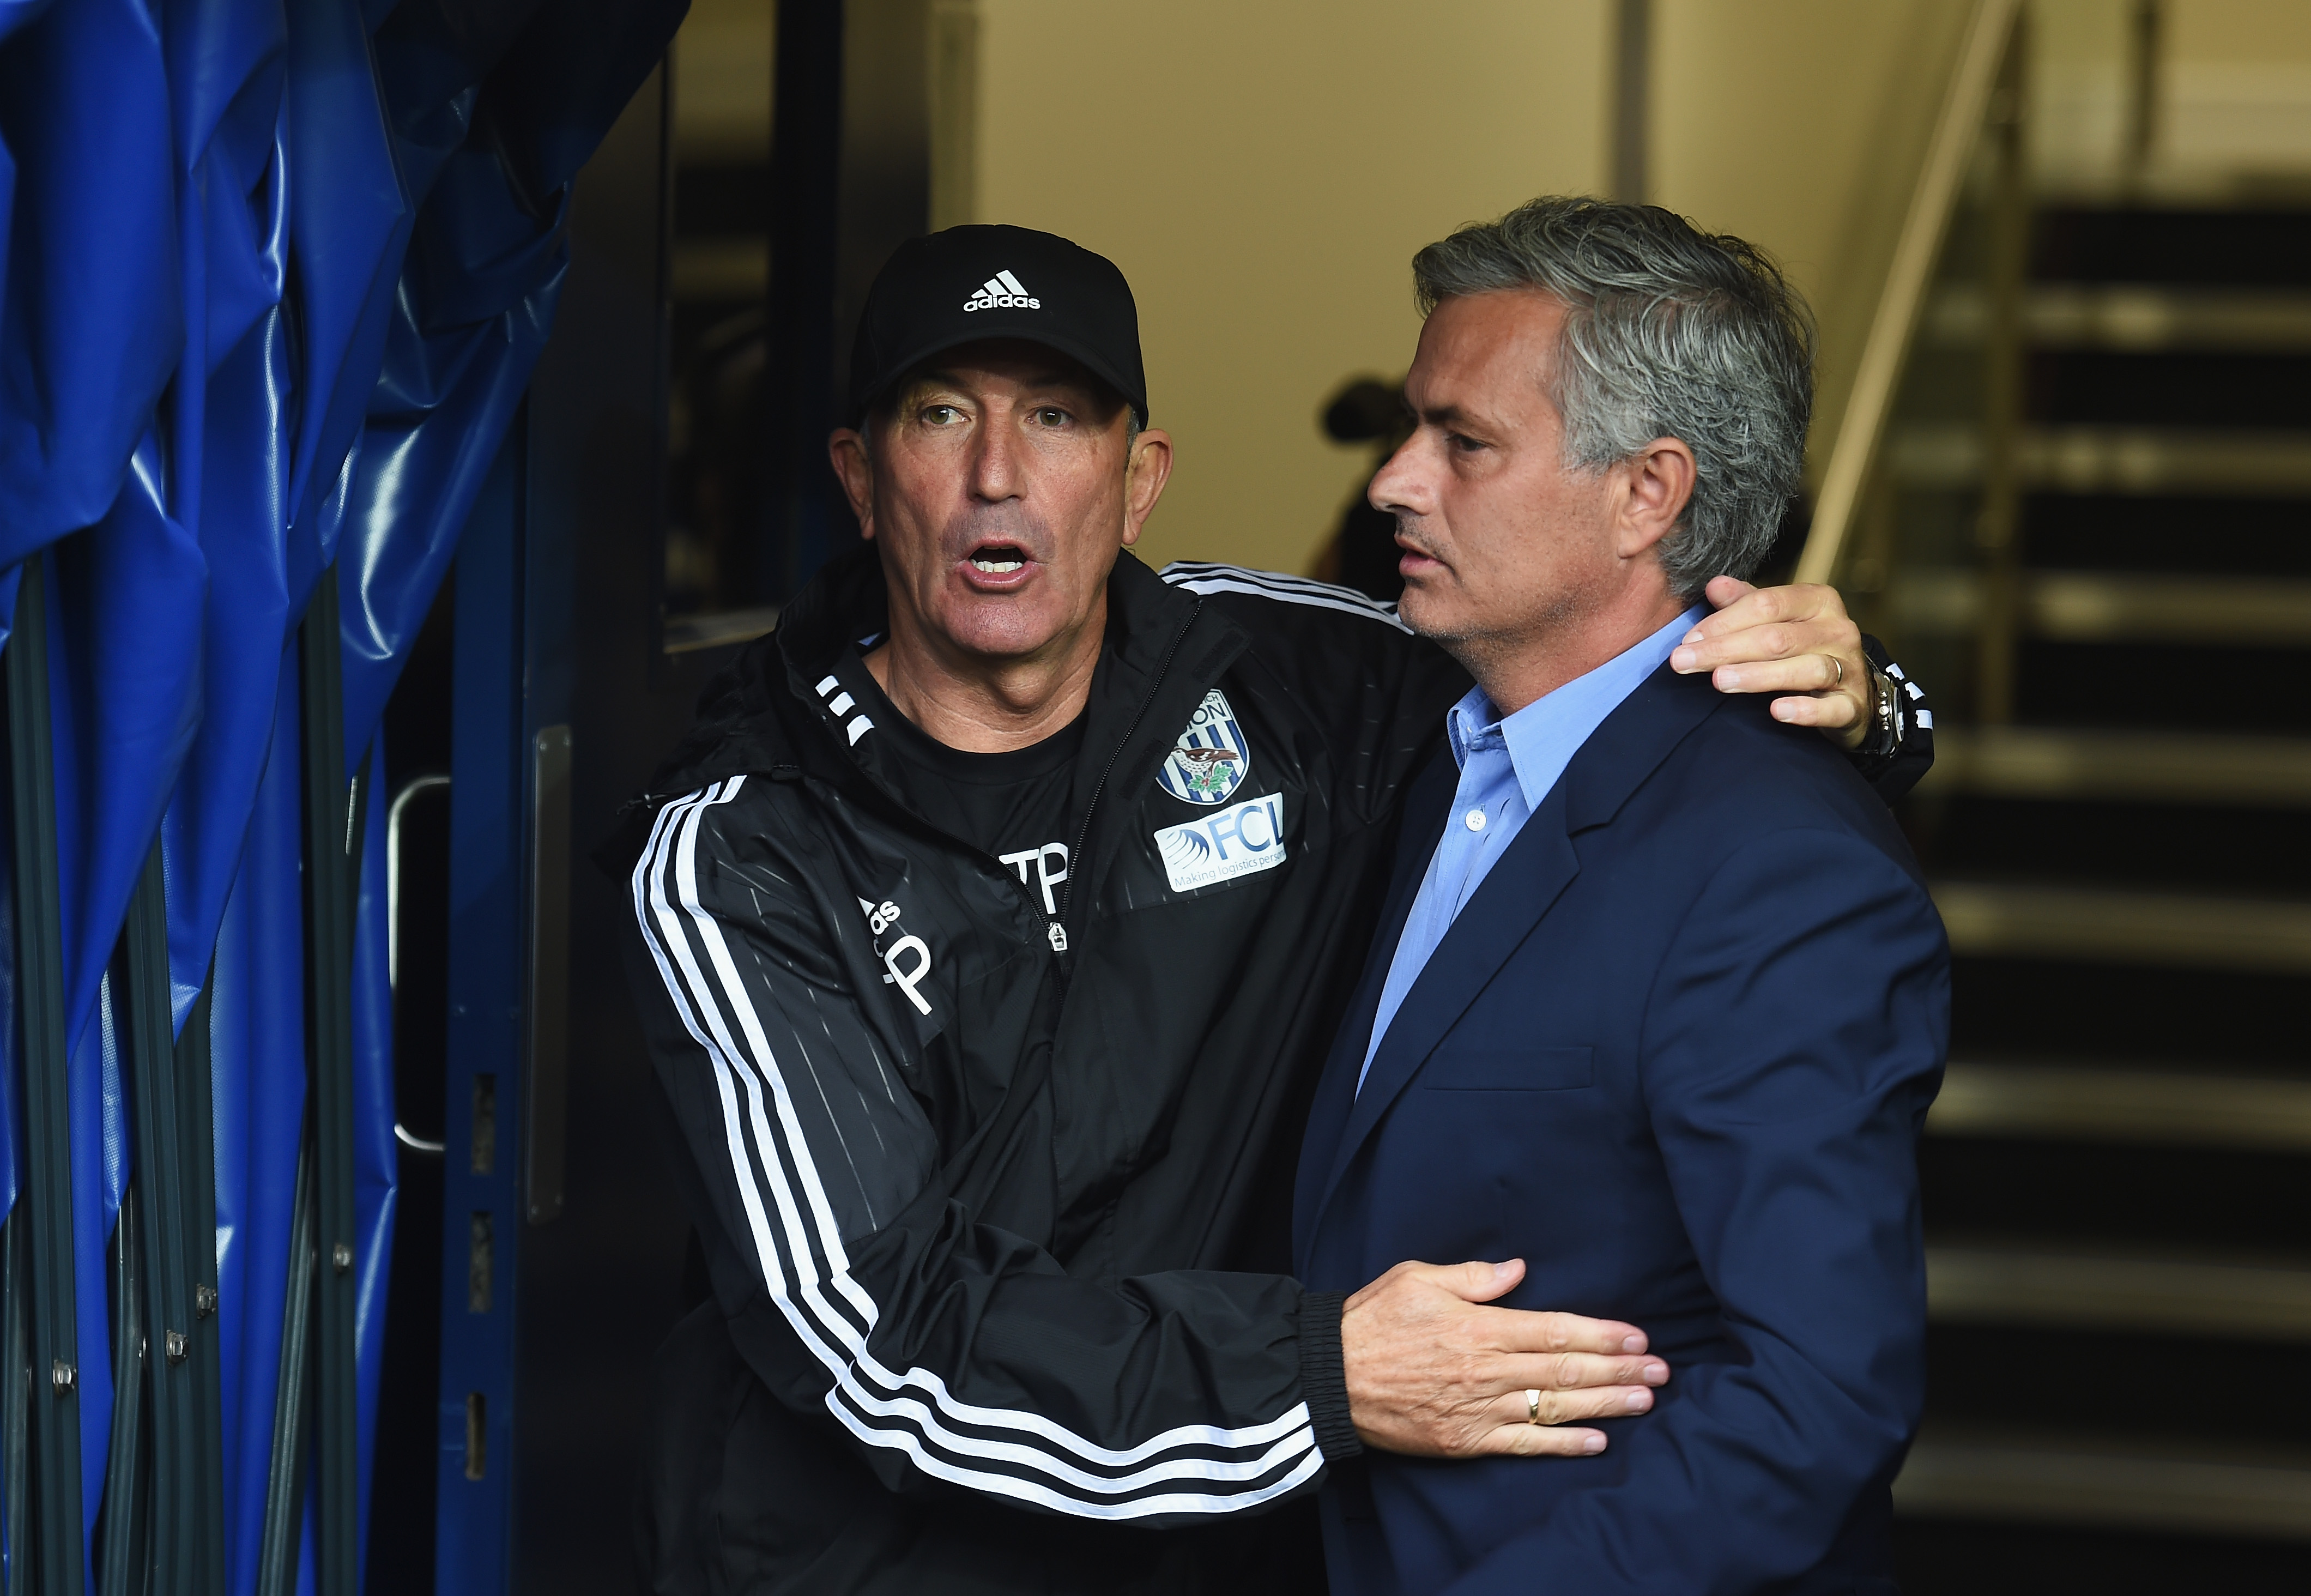 WEST BROMWICH, ENGLAND - AUGUST 23: Tony Pulis, manager of West Bromwich Albion greets Jose Mourinho, manager of Chelsea prior to the Barclays Premier League match between West Bromwich Albion and Chelsea at The Hawthorns on August 23, 2015 in West Bromwich, England.  (Photo by Michael Regan/Getty Images)